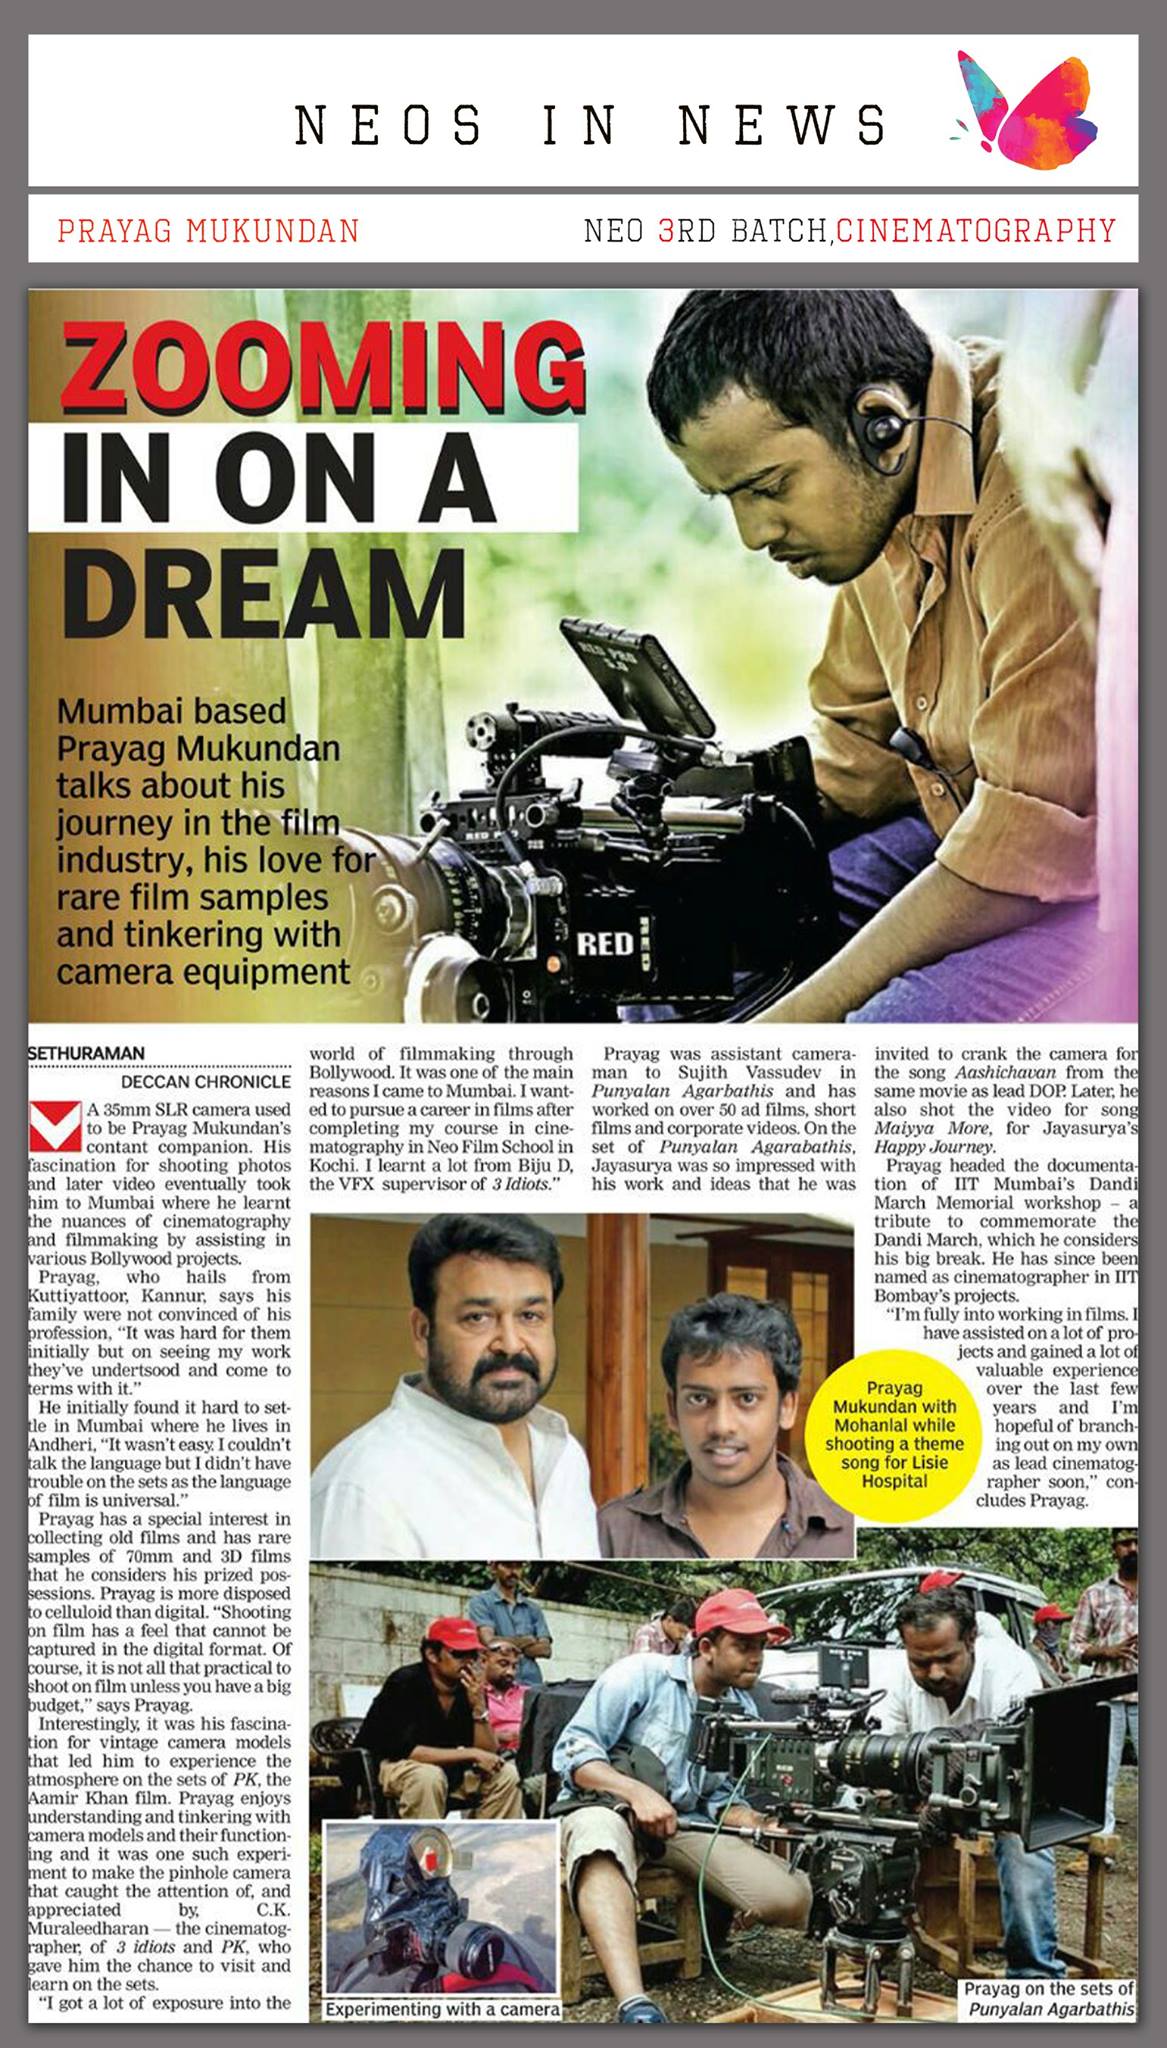 News came in MEDIA about our NEOS Cinematographer Prayag Mukundan.